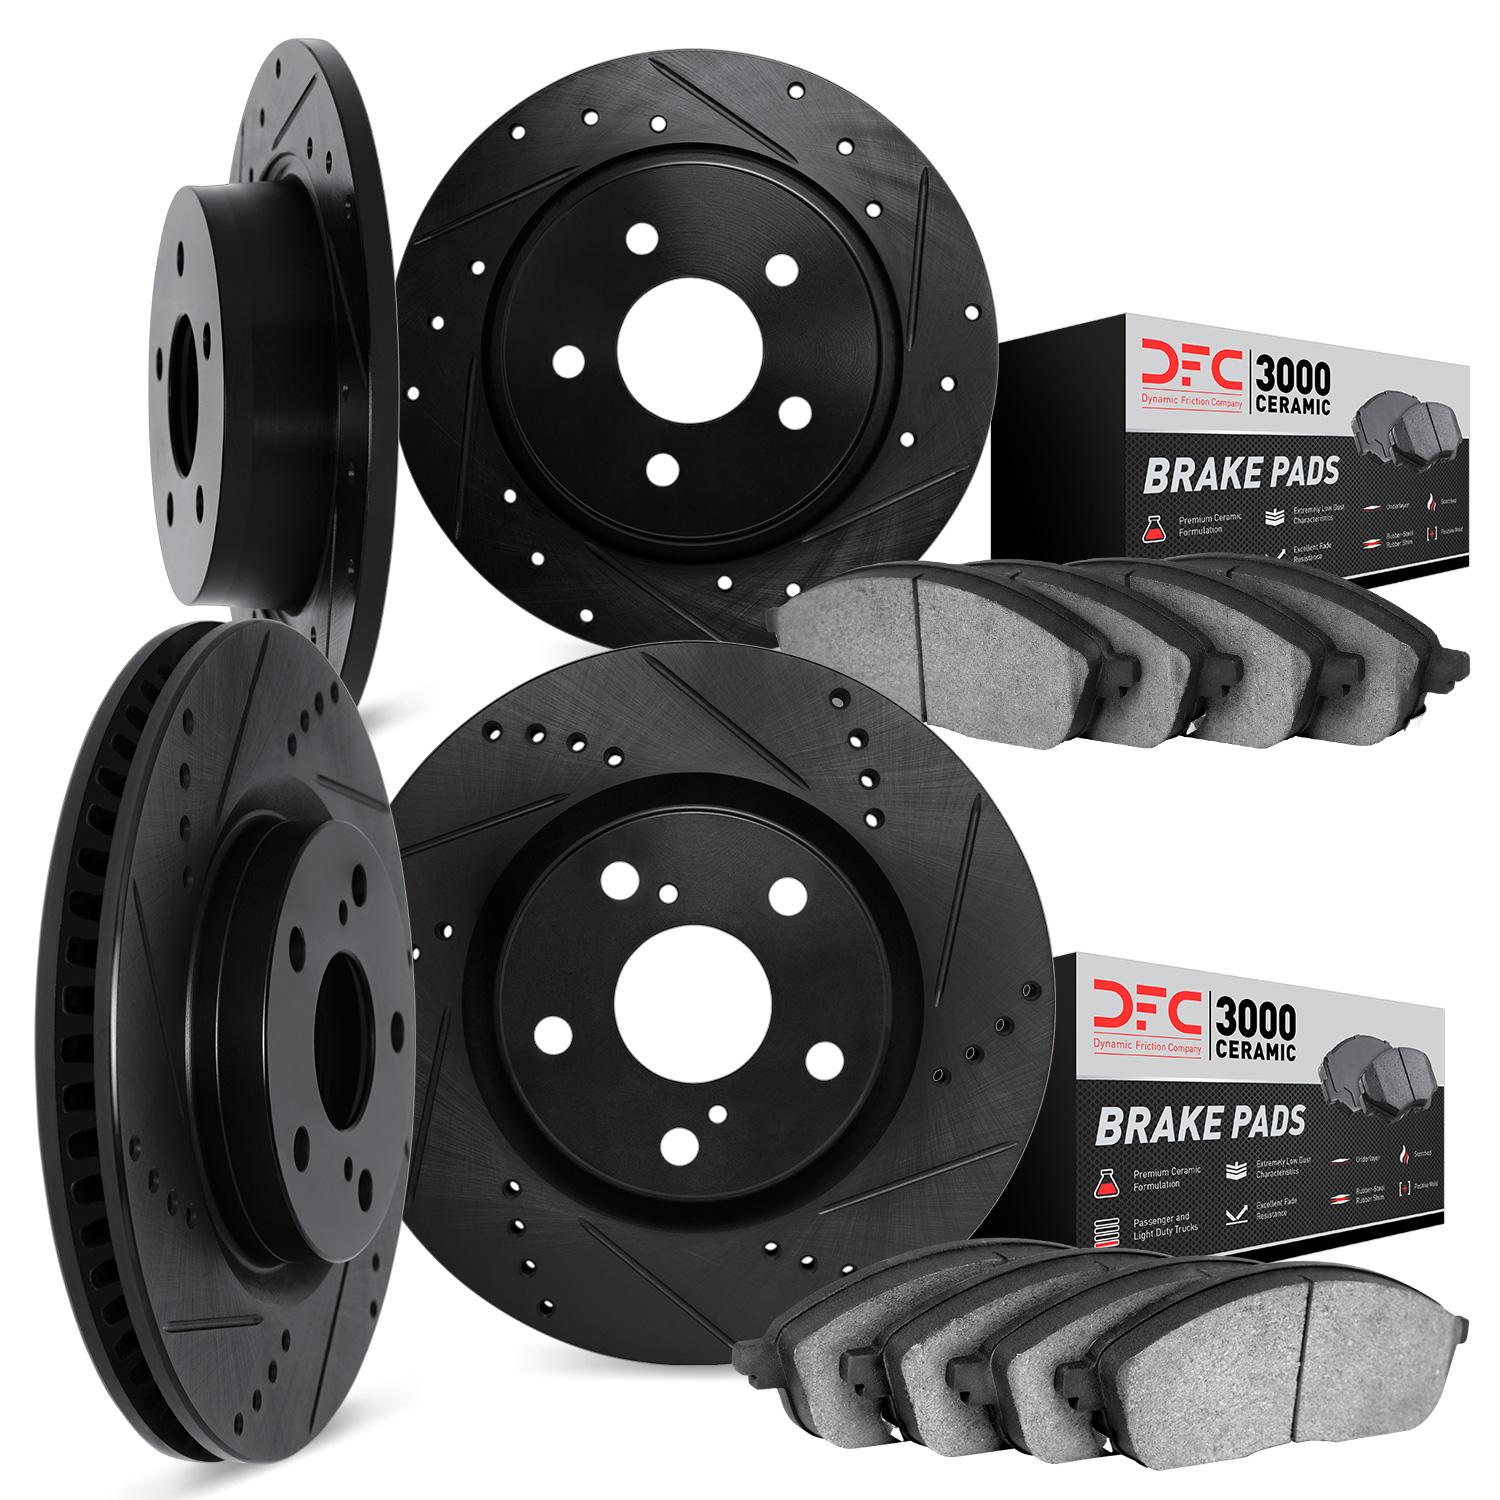 8304-13022 Drilled/Slotted Brake Rotors with 3000-Series Ceramic Brake Pads Kit [Black], 2002-2006 Subaru, Position: Front and R